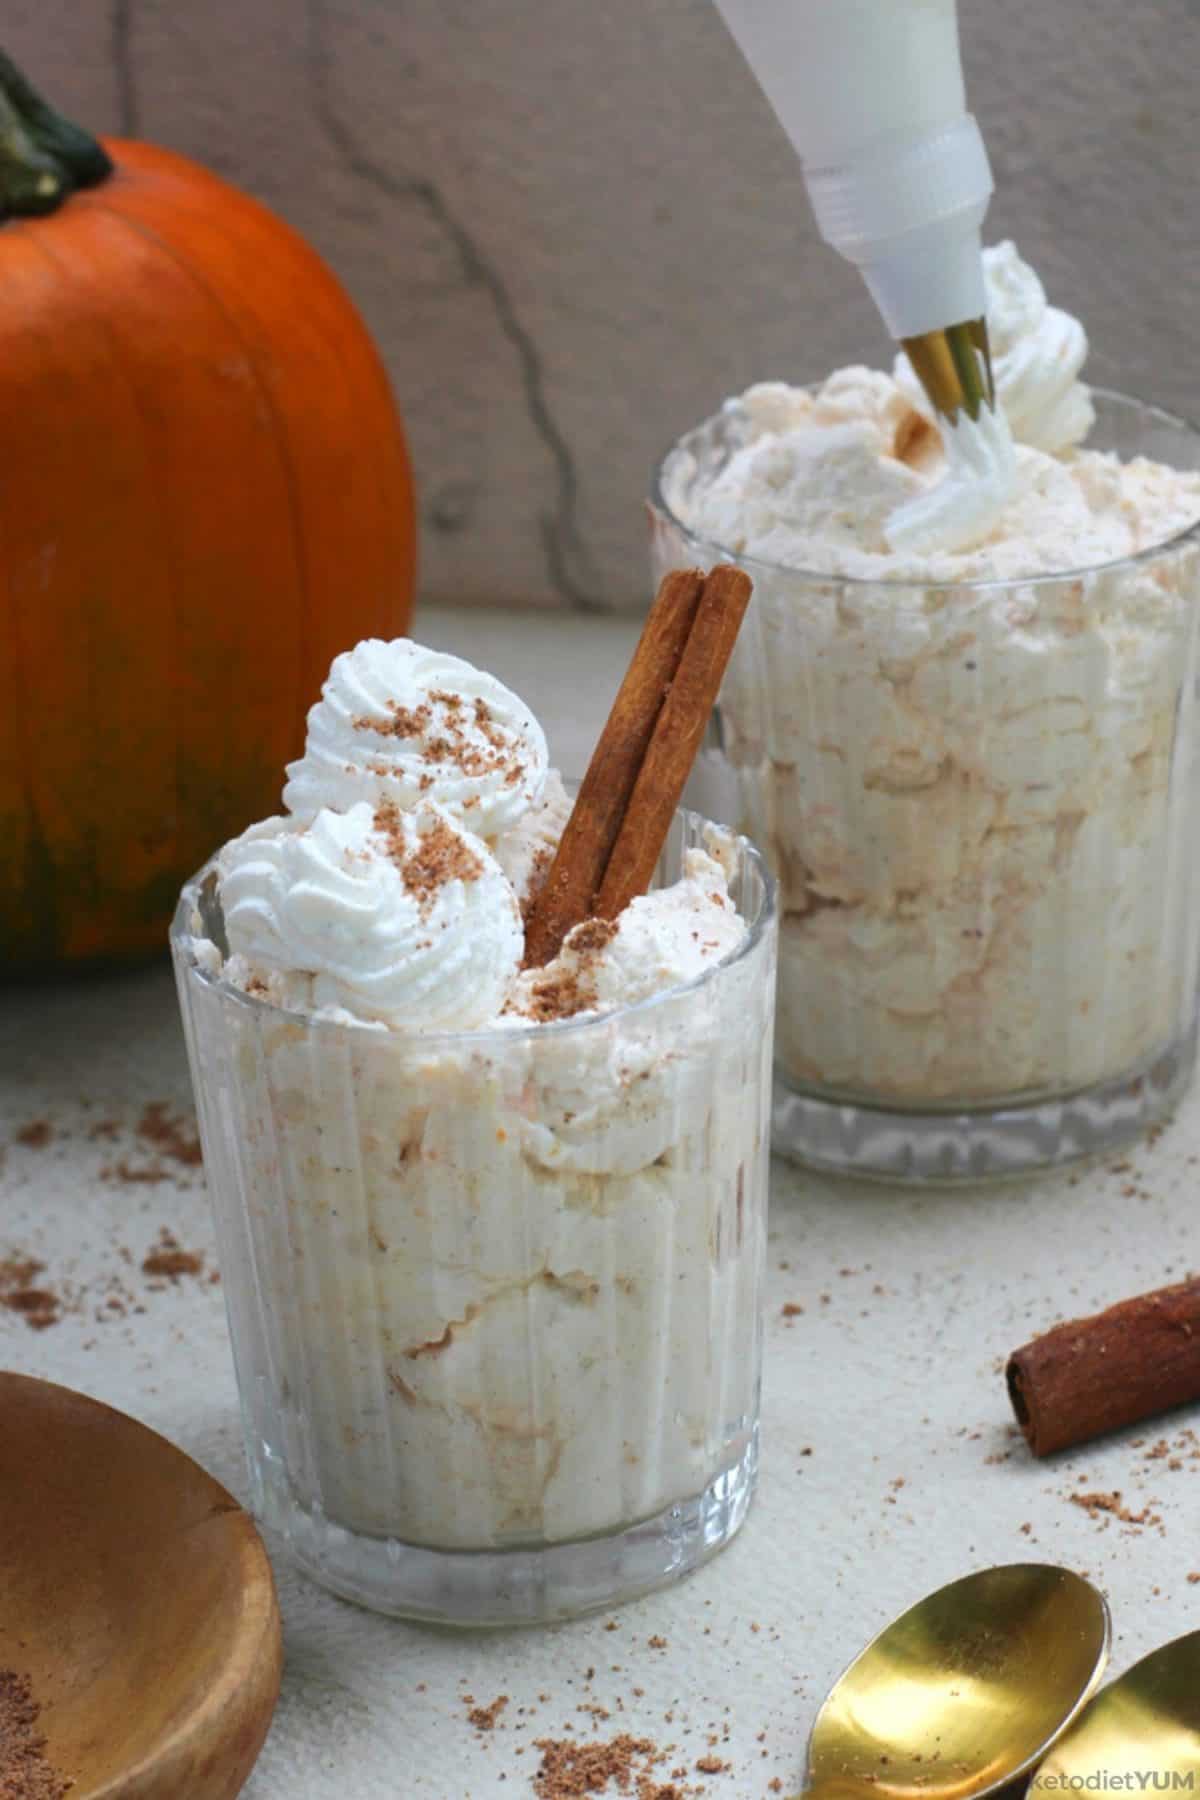 Delicious keto pumpkin mousse served with a sprinkle of pumpkin pie spice and a stick of cinnamon for decoration